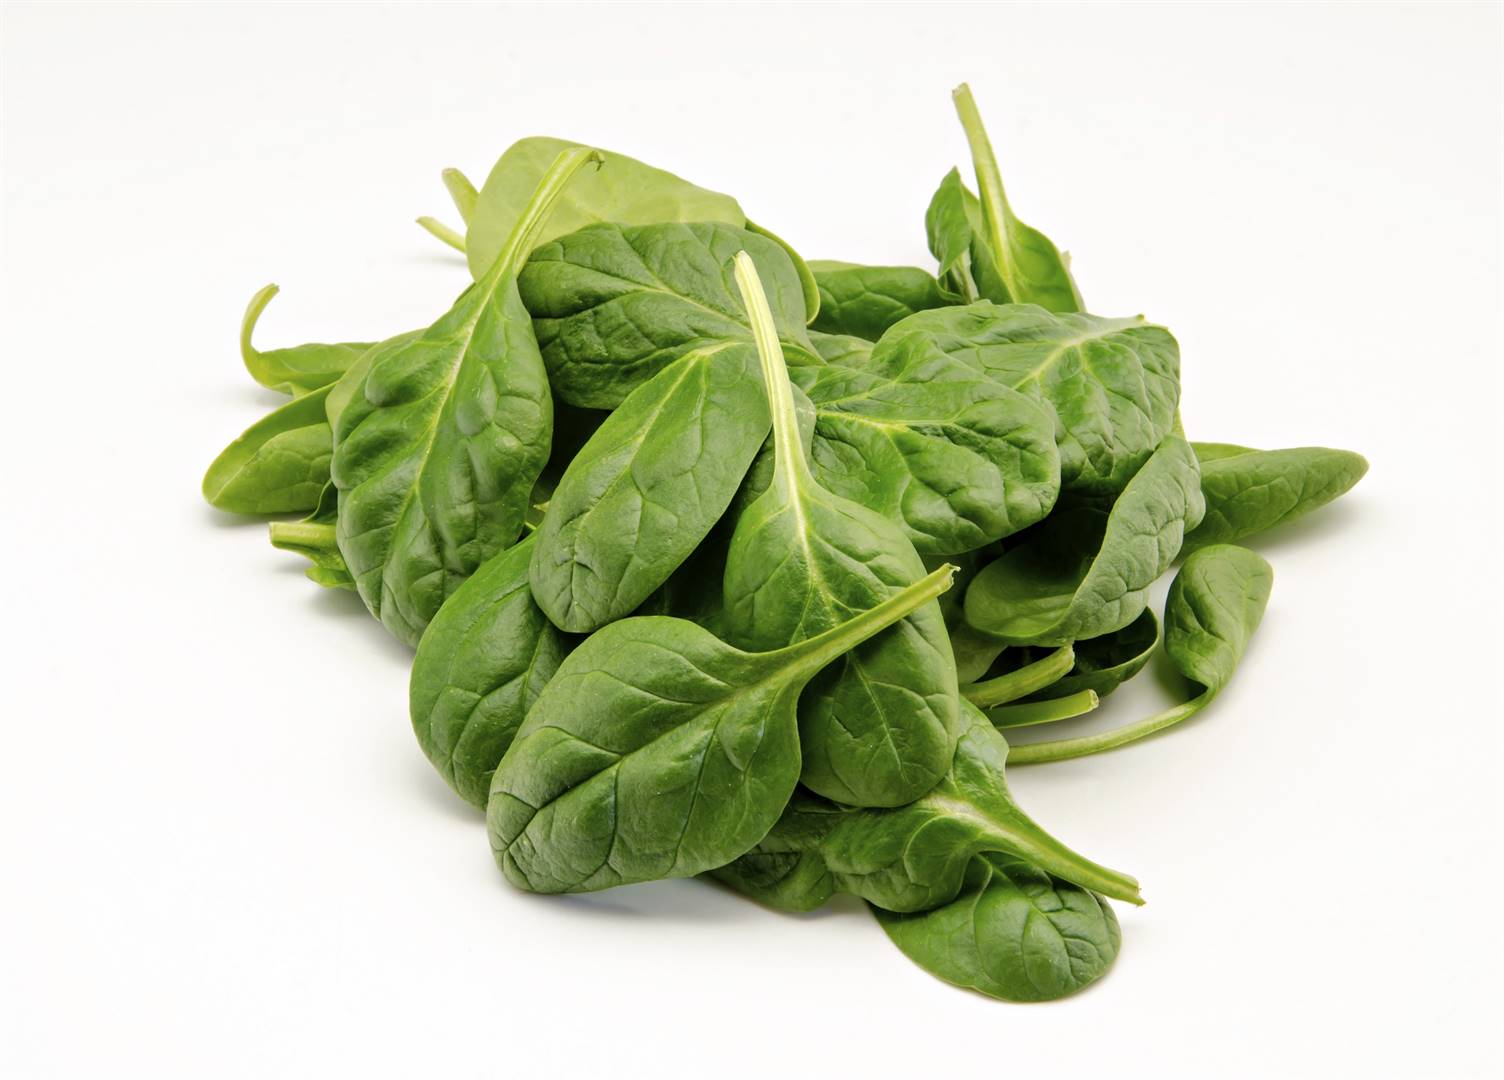 Spinach as well as other green veggies help fight off the flu.